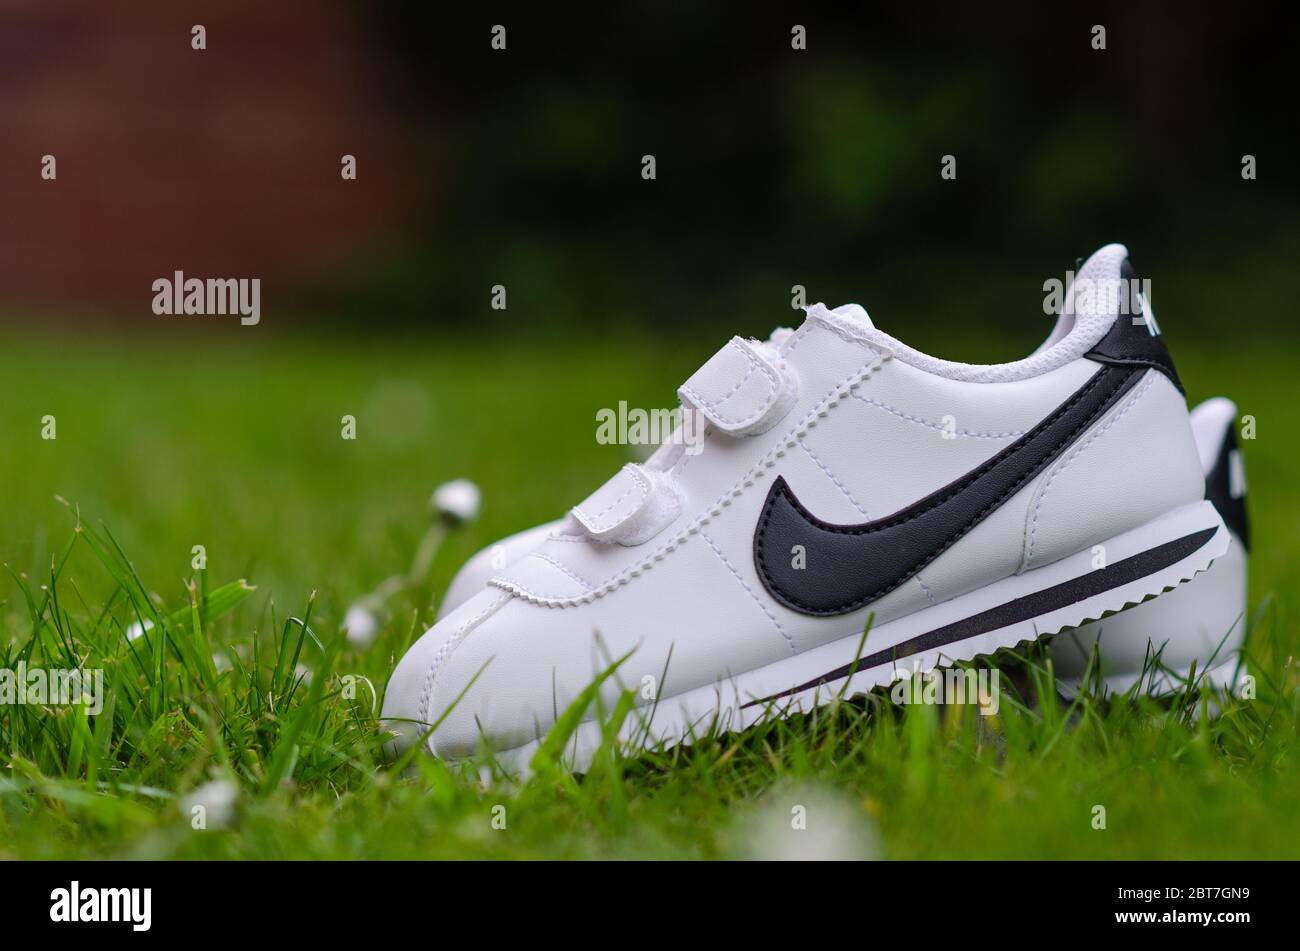 Green Nike Trainers High Resolution Stock Photography and Images - Alamy